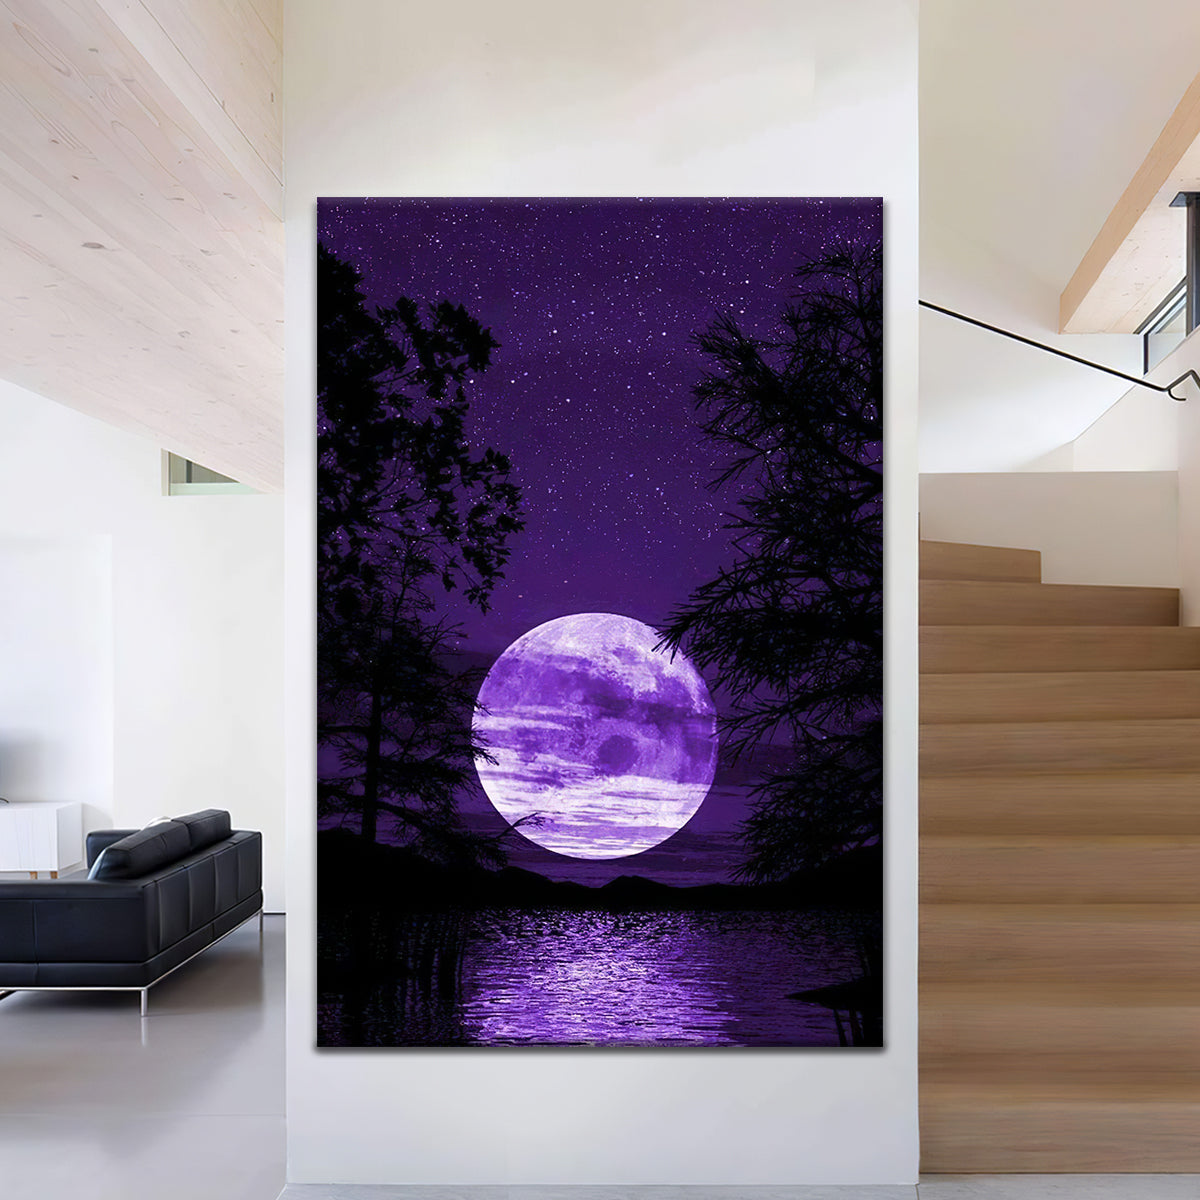 Pictures Canvas Wall Pictures Art Print Design Canvas Stitch Sky 